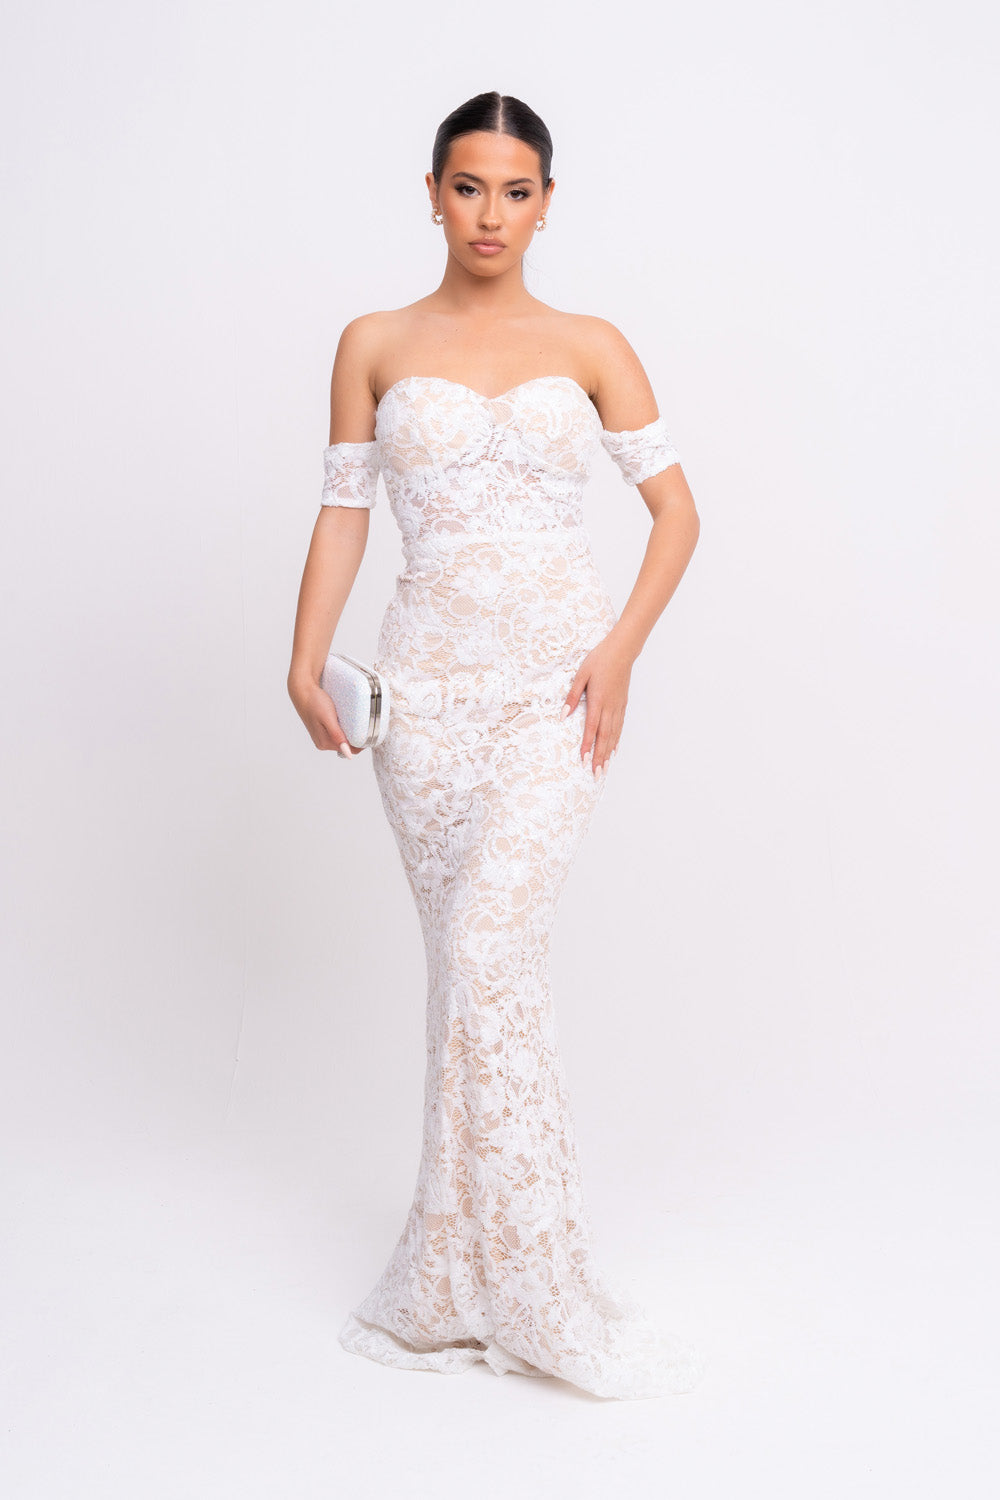 Daydreamer White Floral Lace Sequin Embellished Off The Shoulder Bardot Cuff Maxi Dress